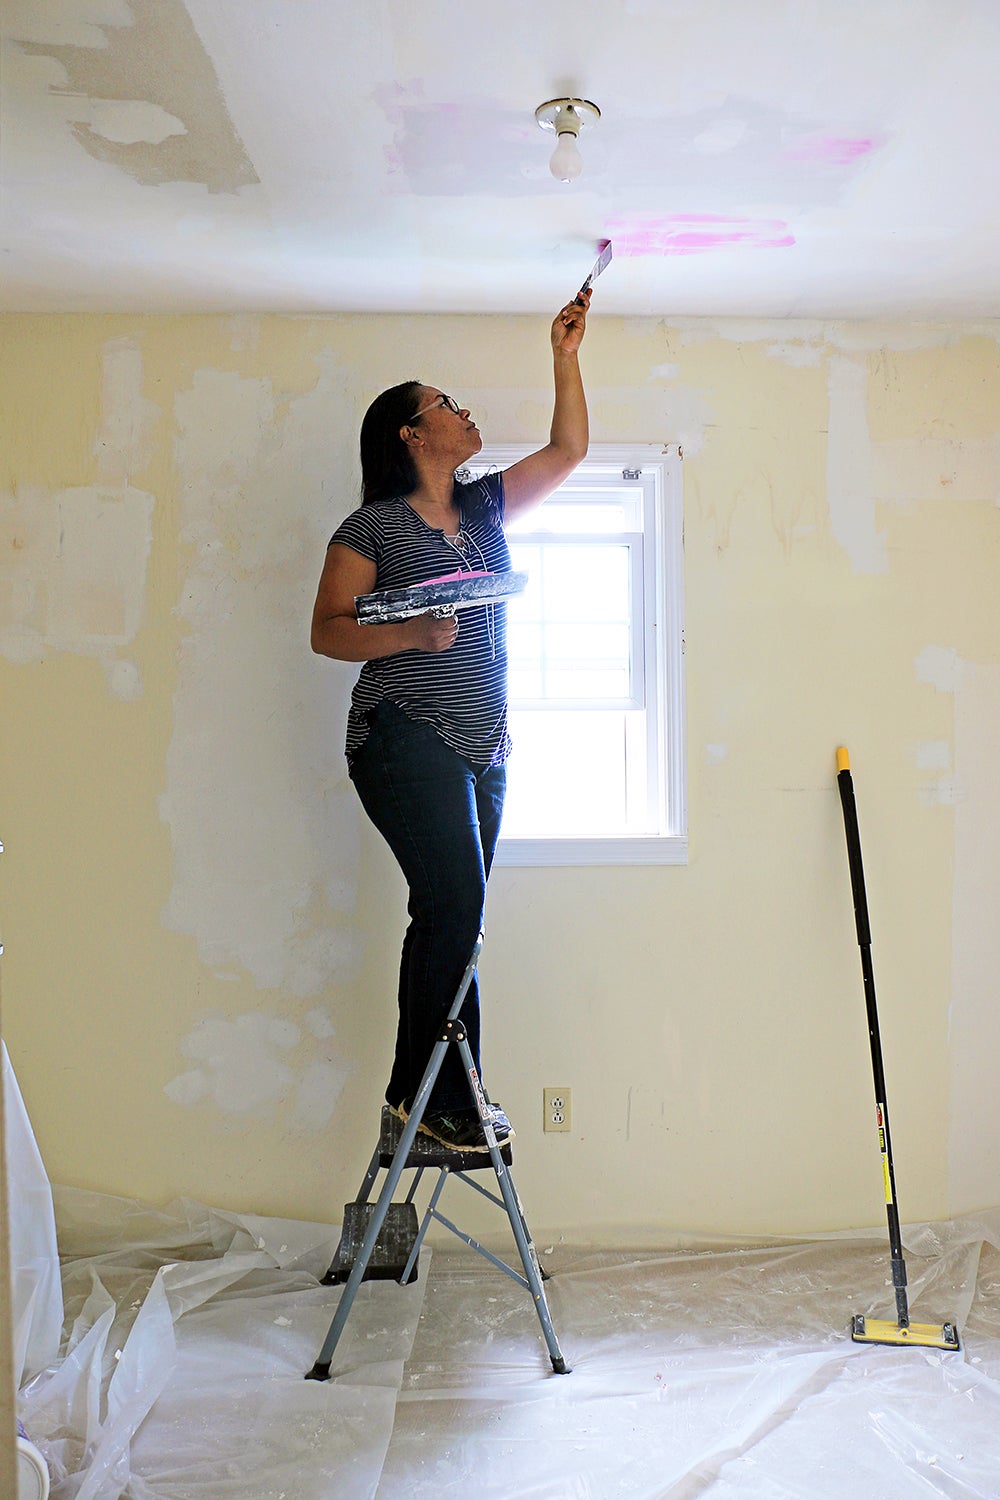 woman scraping ceiling